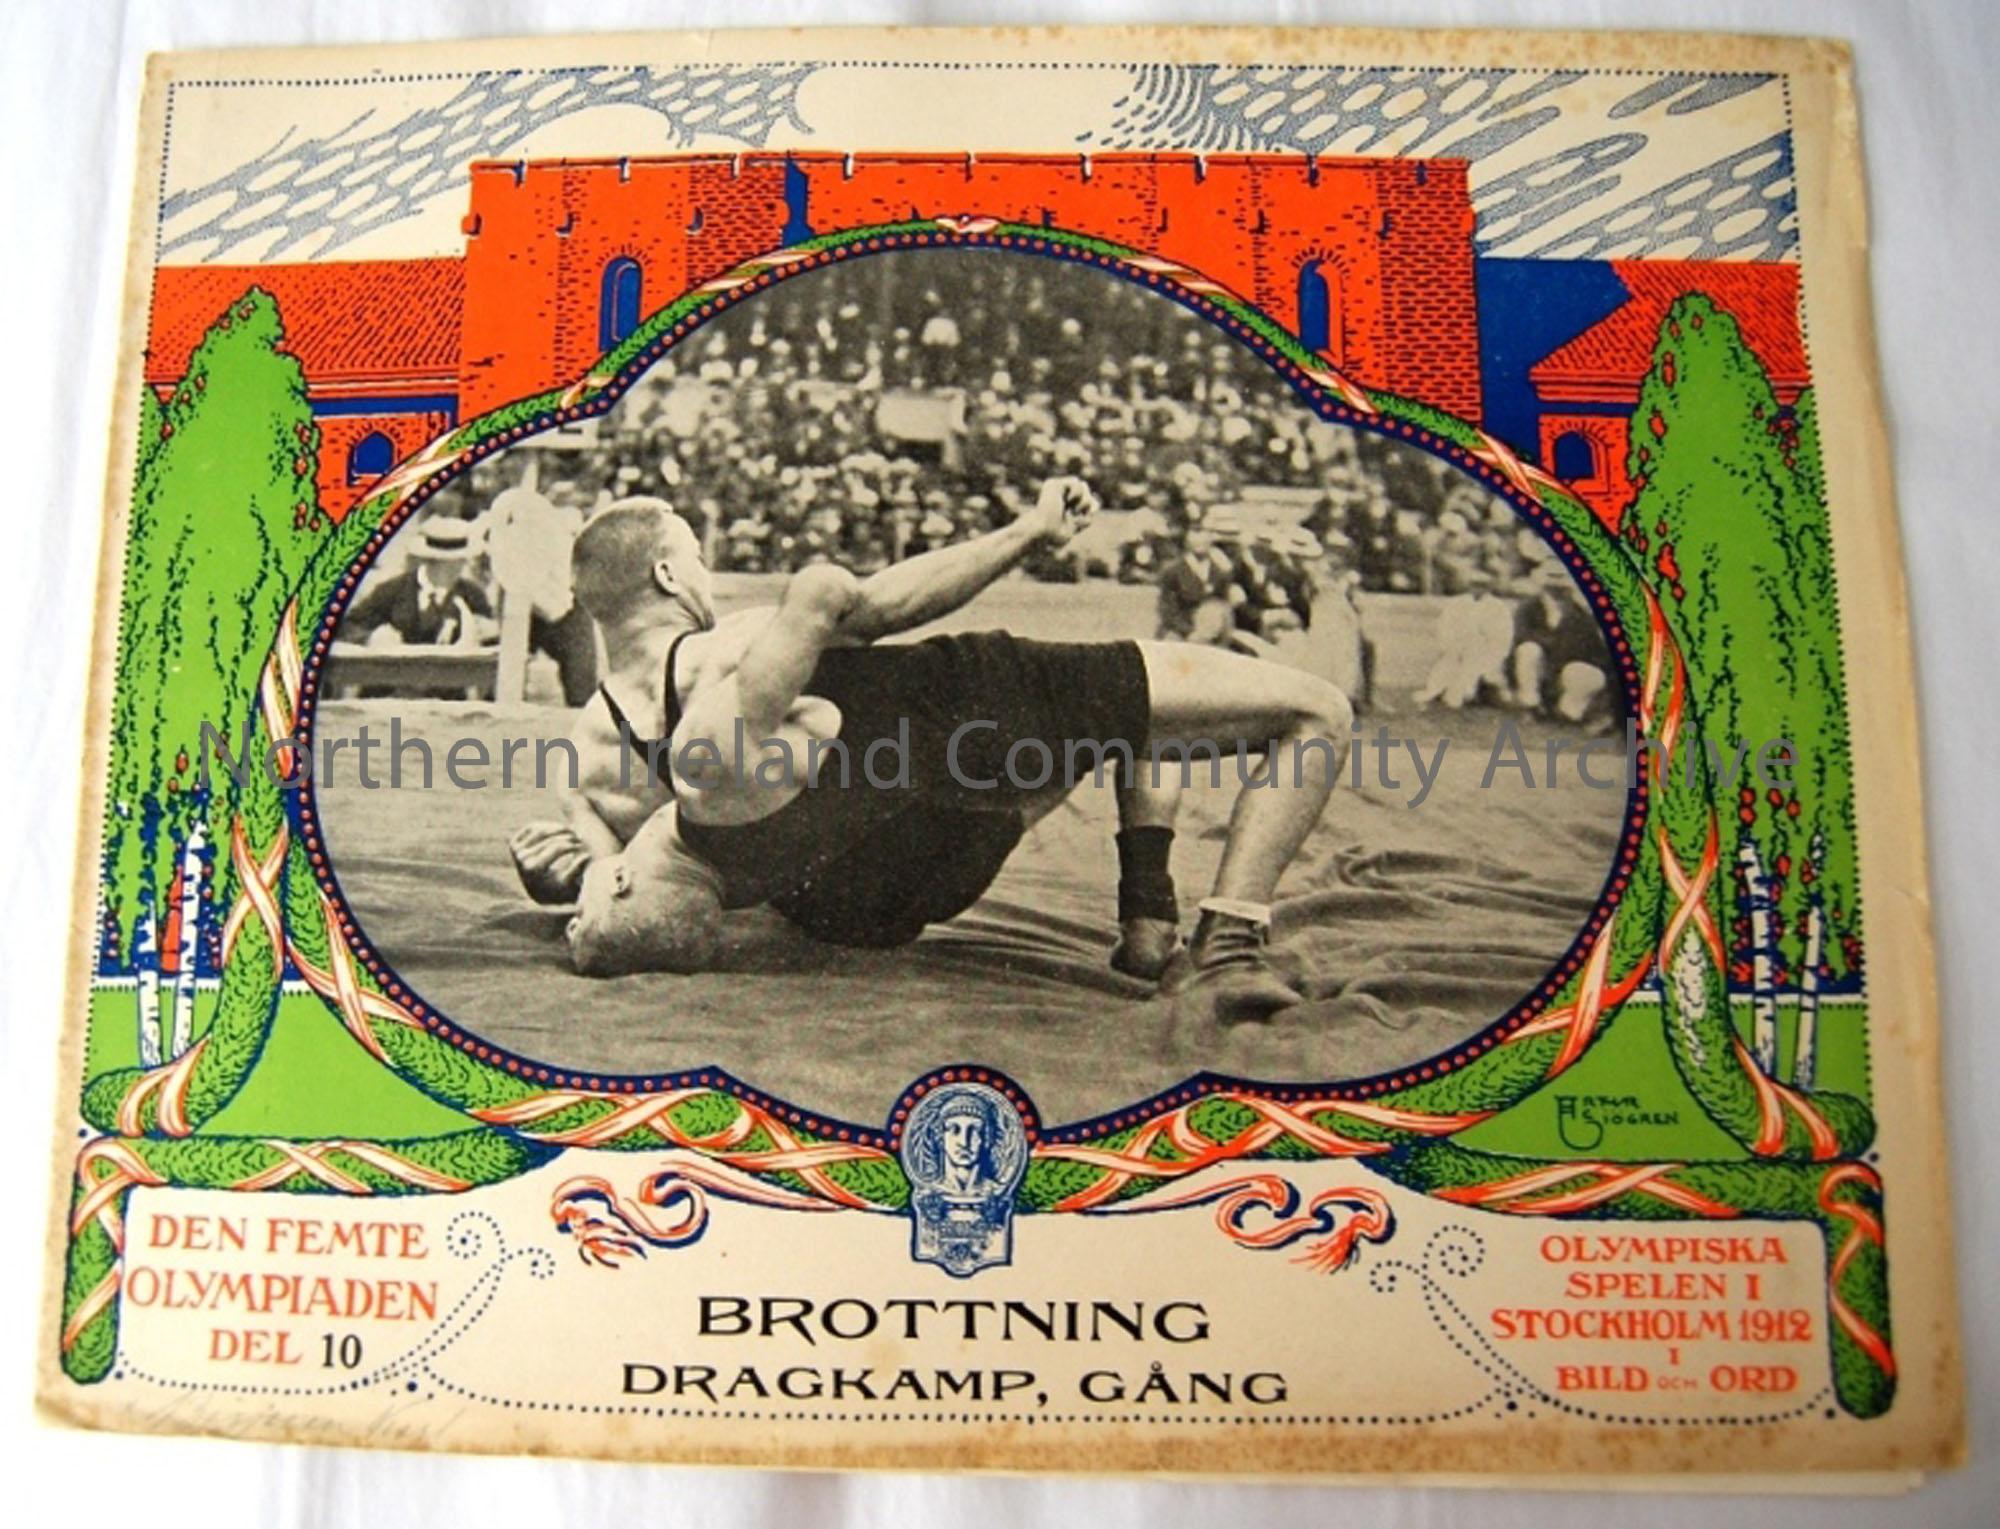 After the 1912 Olympic games 24 booklets were produced in Swedish. This issue features the wresting tug of war